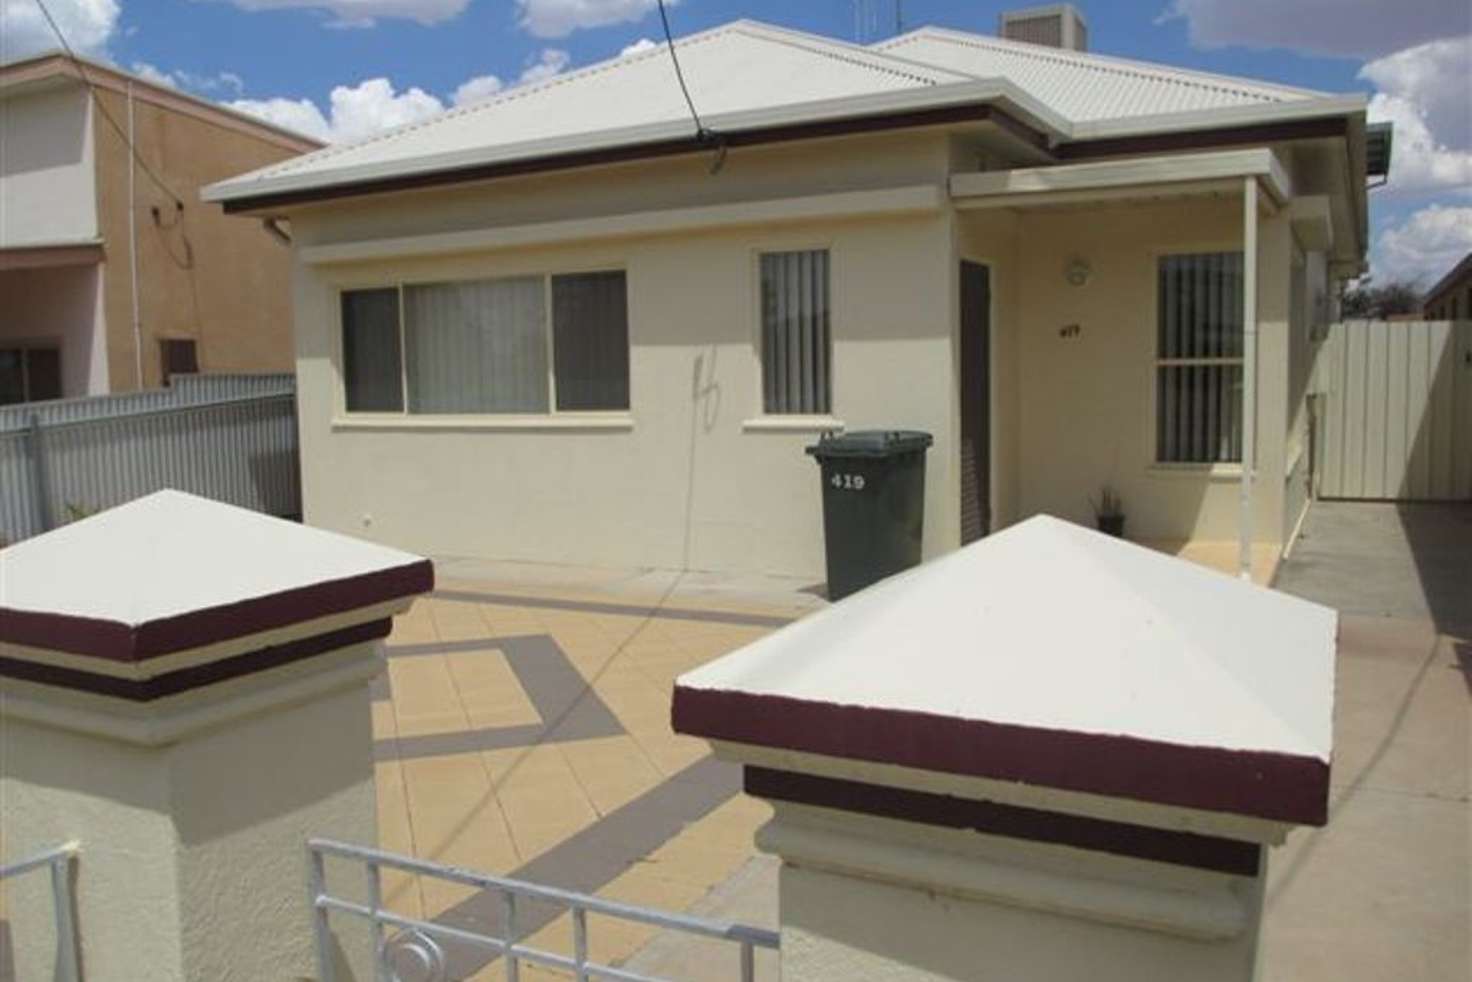 Main view of Homely house listing, 419 Cobalt Street, Broken Hill NSW 2880